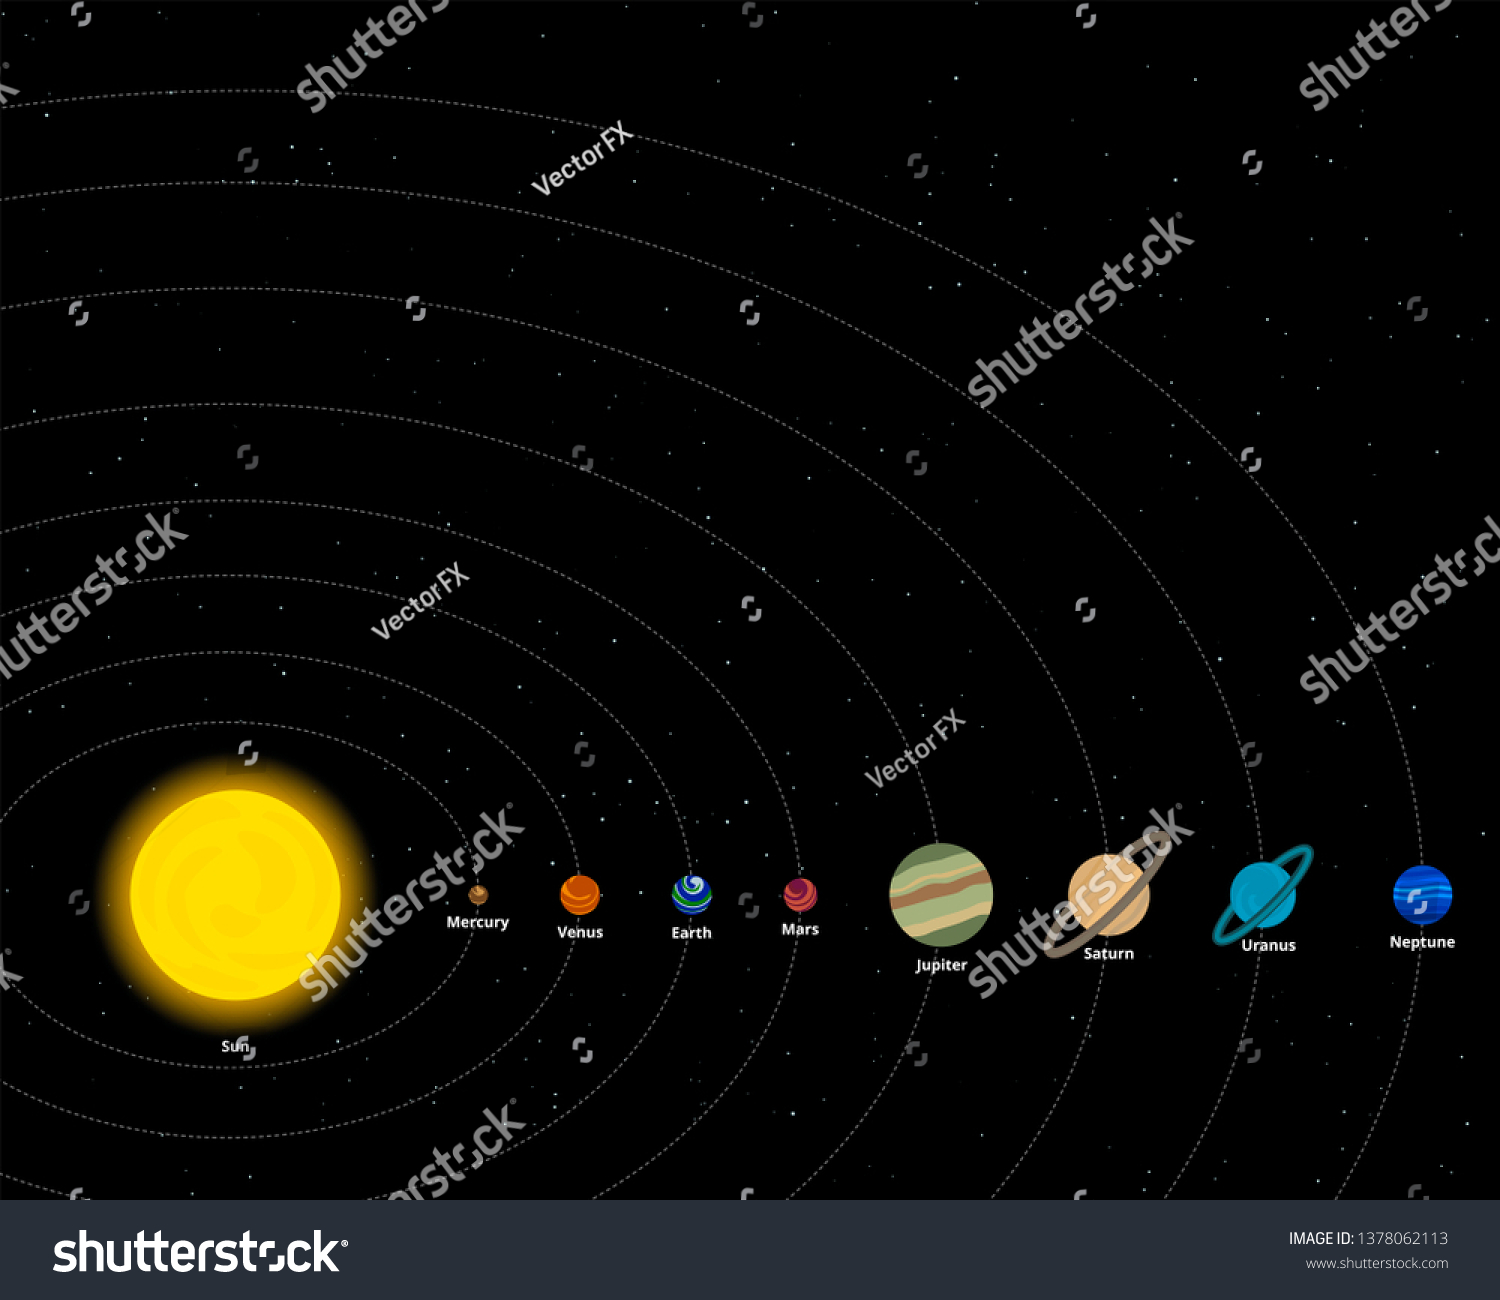 Solar System Template from image.shutterstock.com